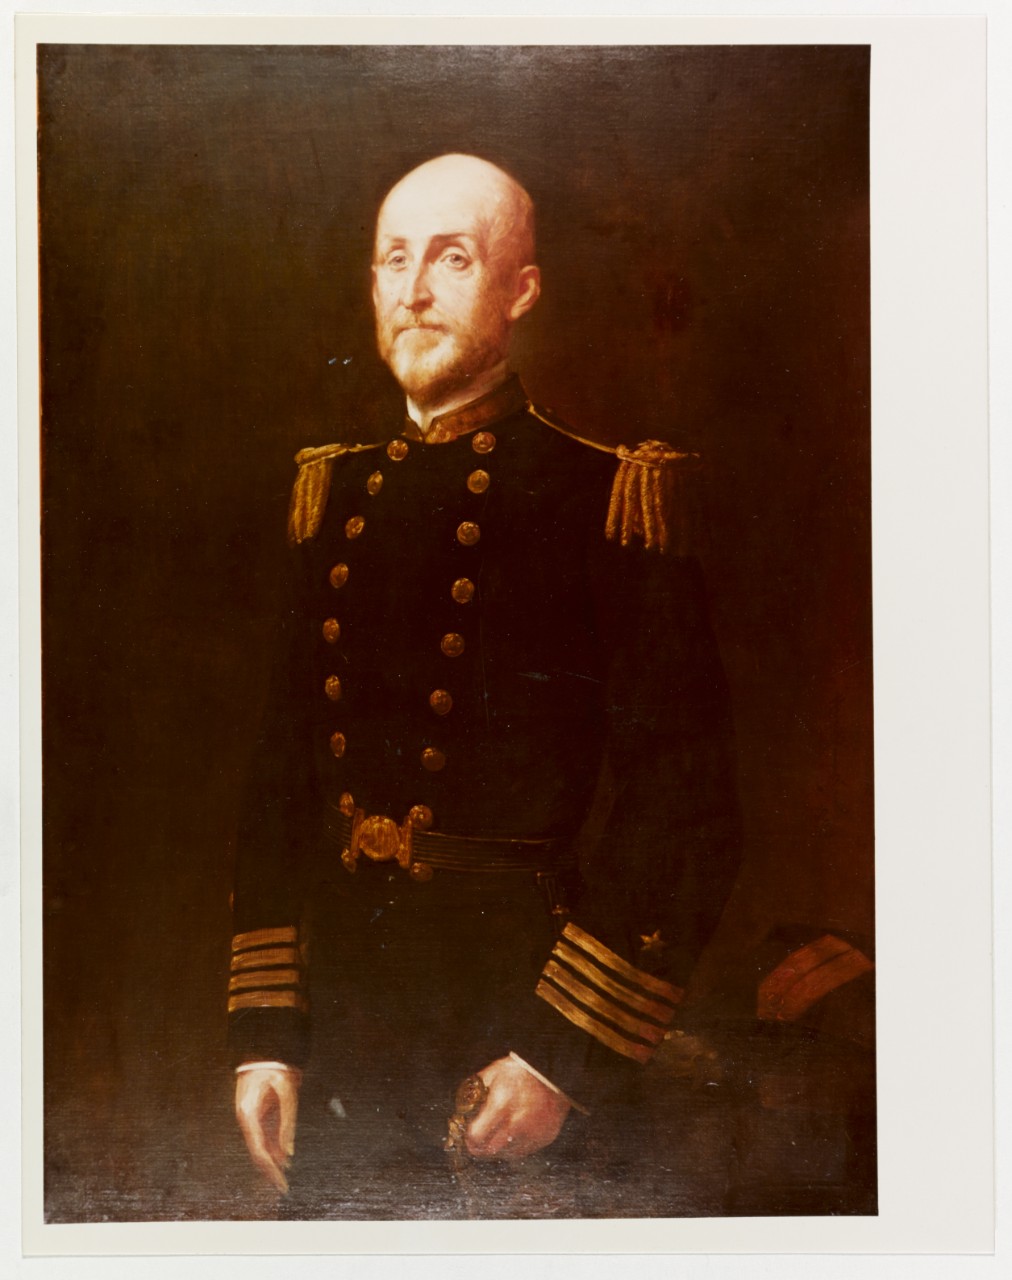 Portrait in oils of author, theorist, and U.S. naval officer Capt. Alfred Thayer Mahan, by an unidentified artist from the Navy Art Collection. (Naval History and Heritage Command Photograph NH 48056-KN)